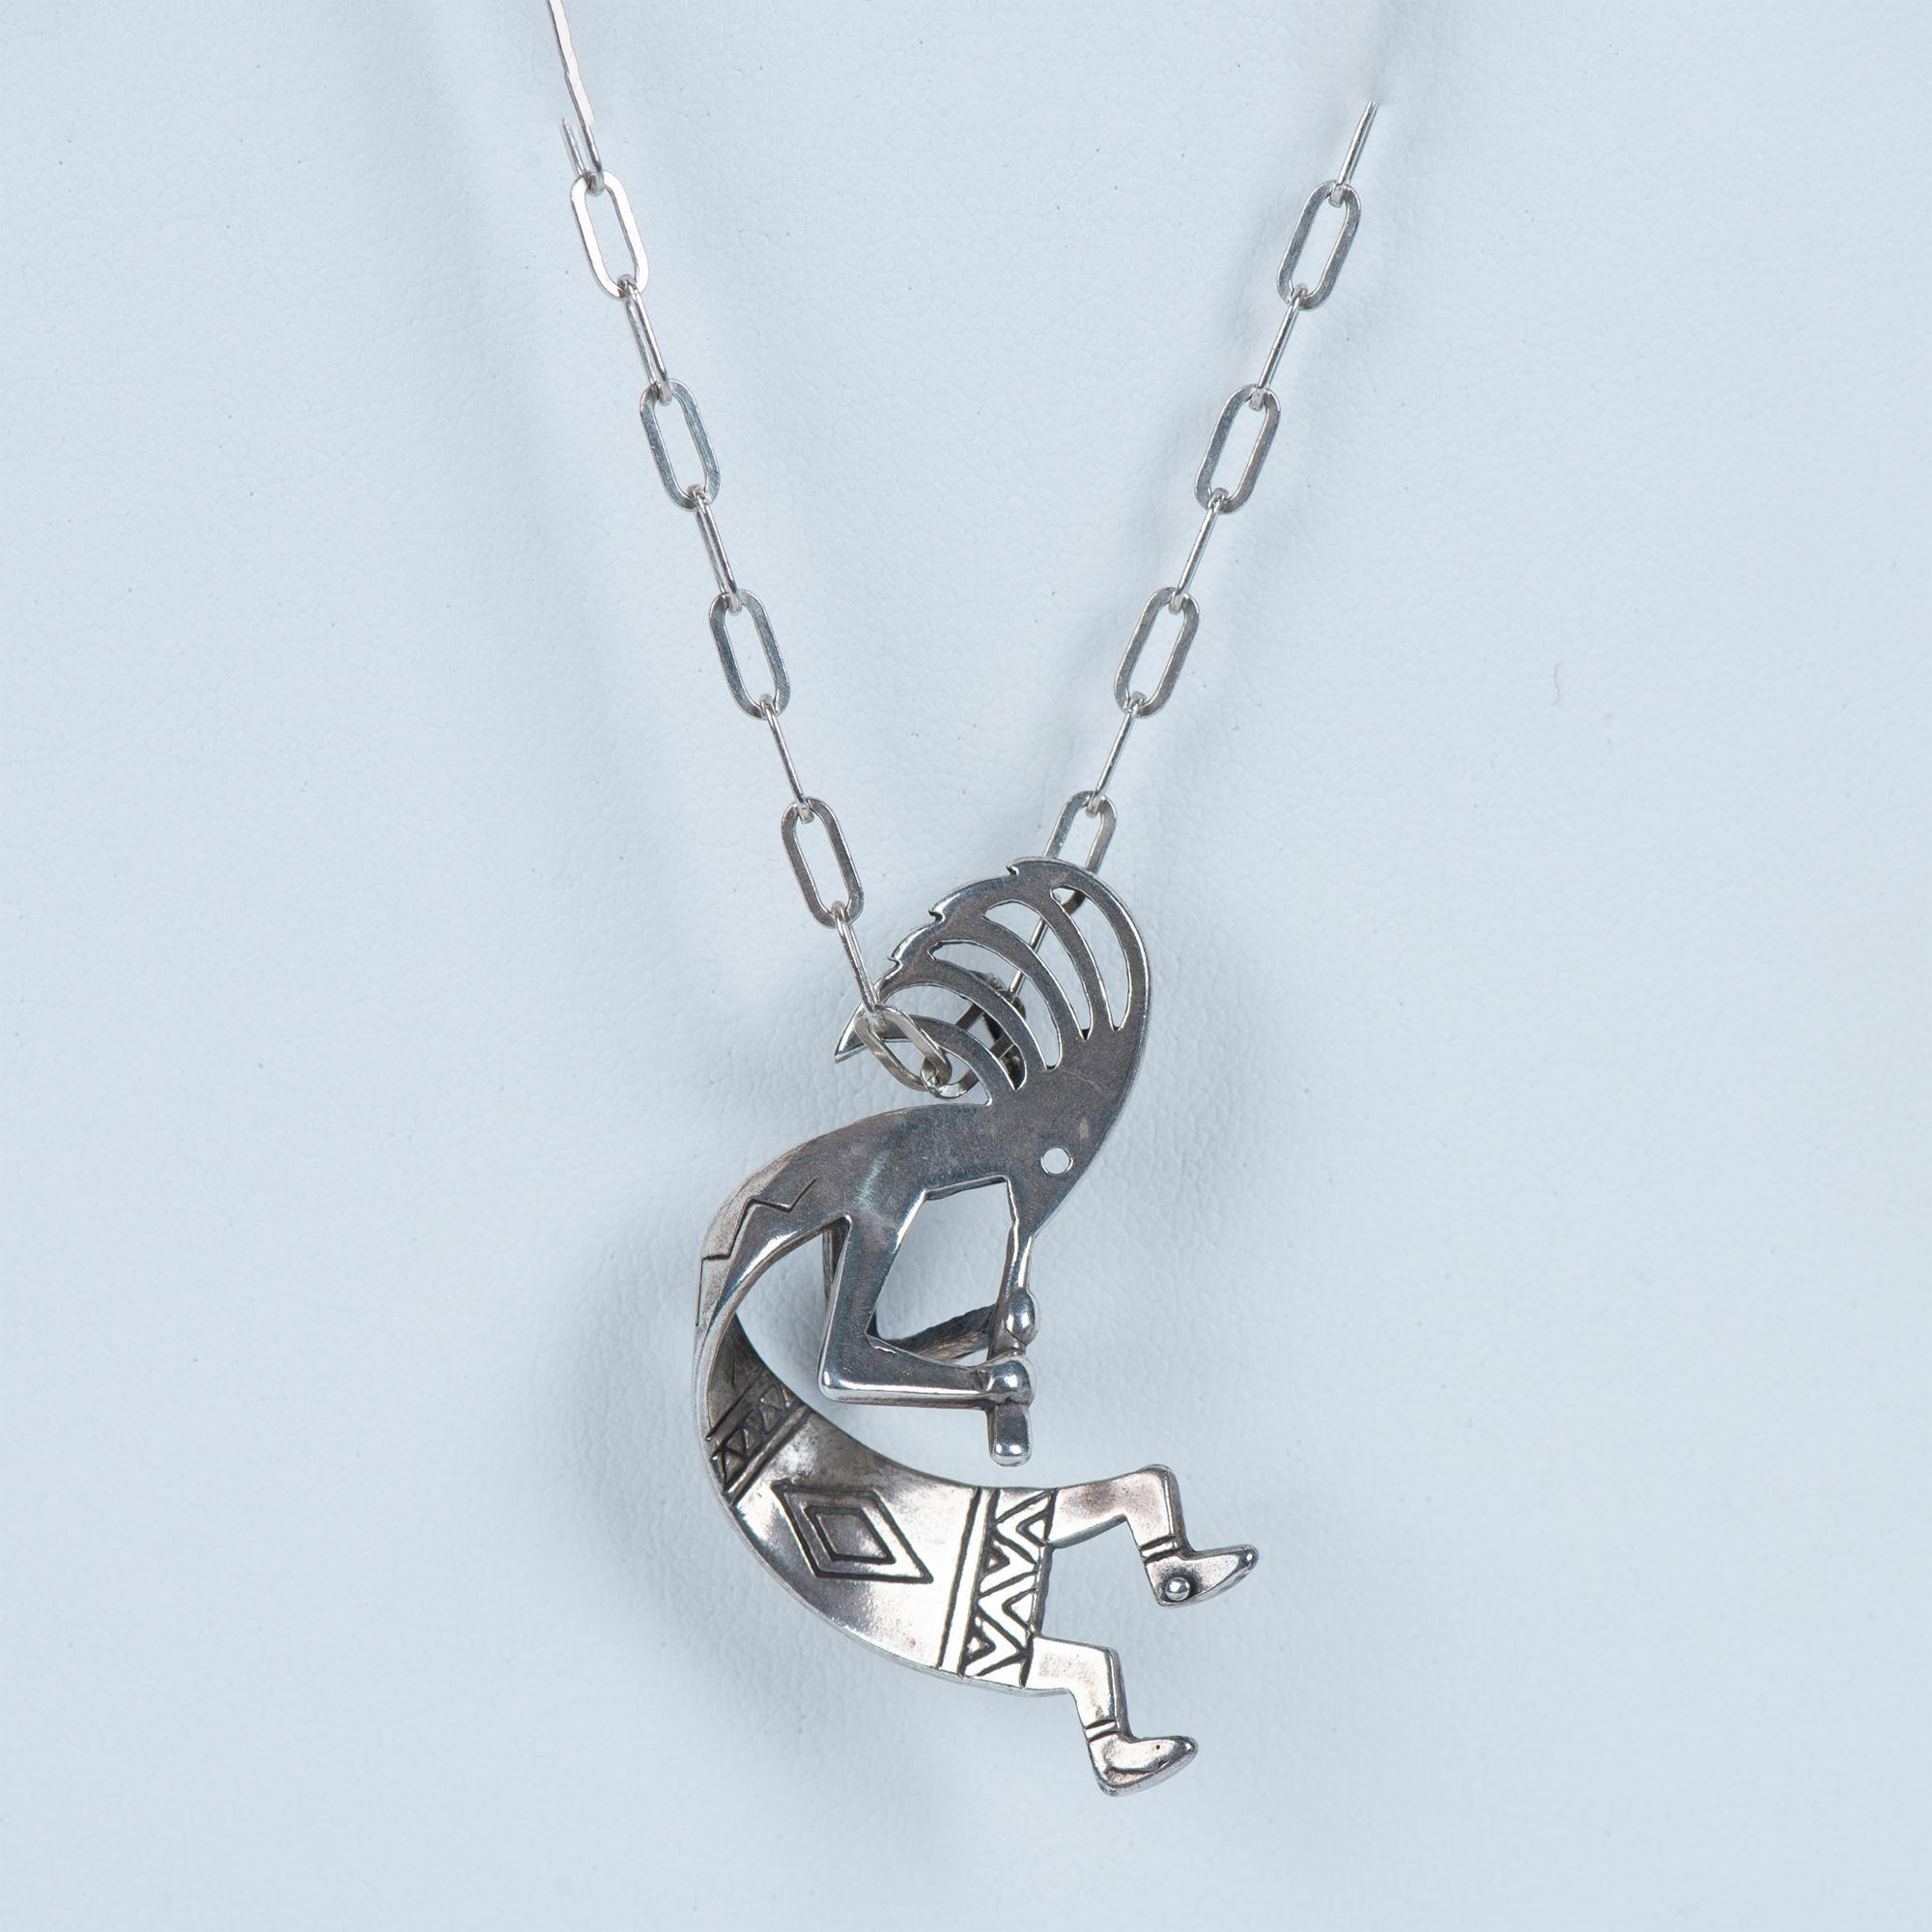 Native American Handmade Sterling Silver Kokopelli Necklace - Image 4 of 4